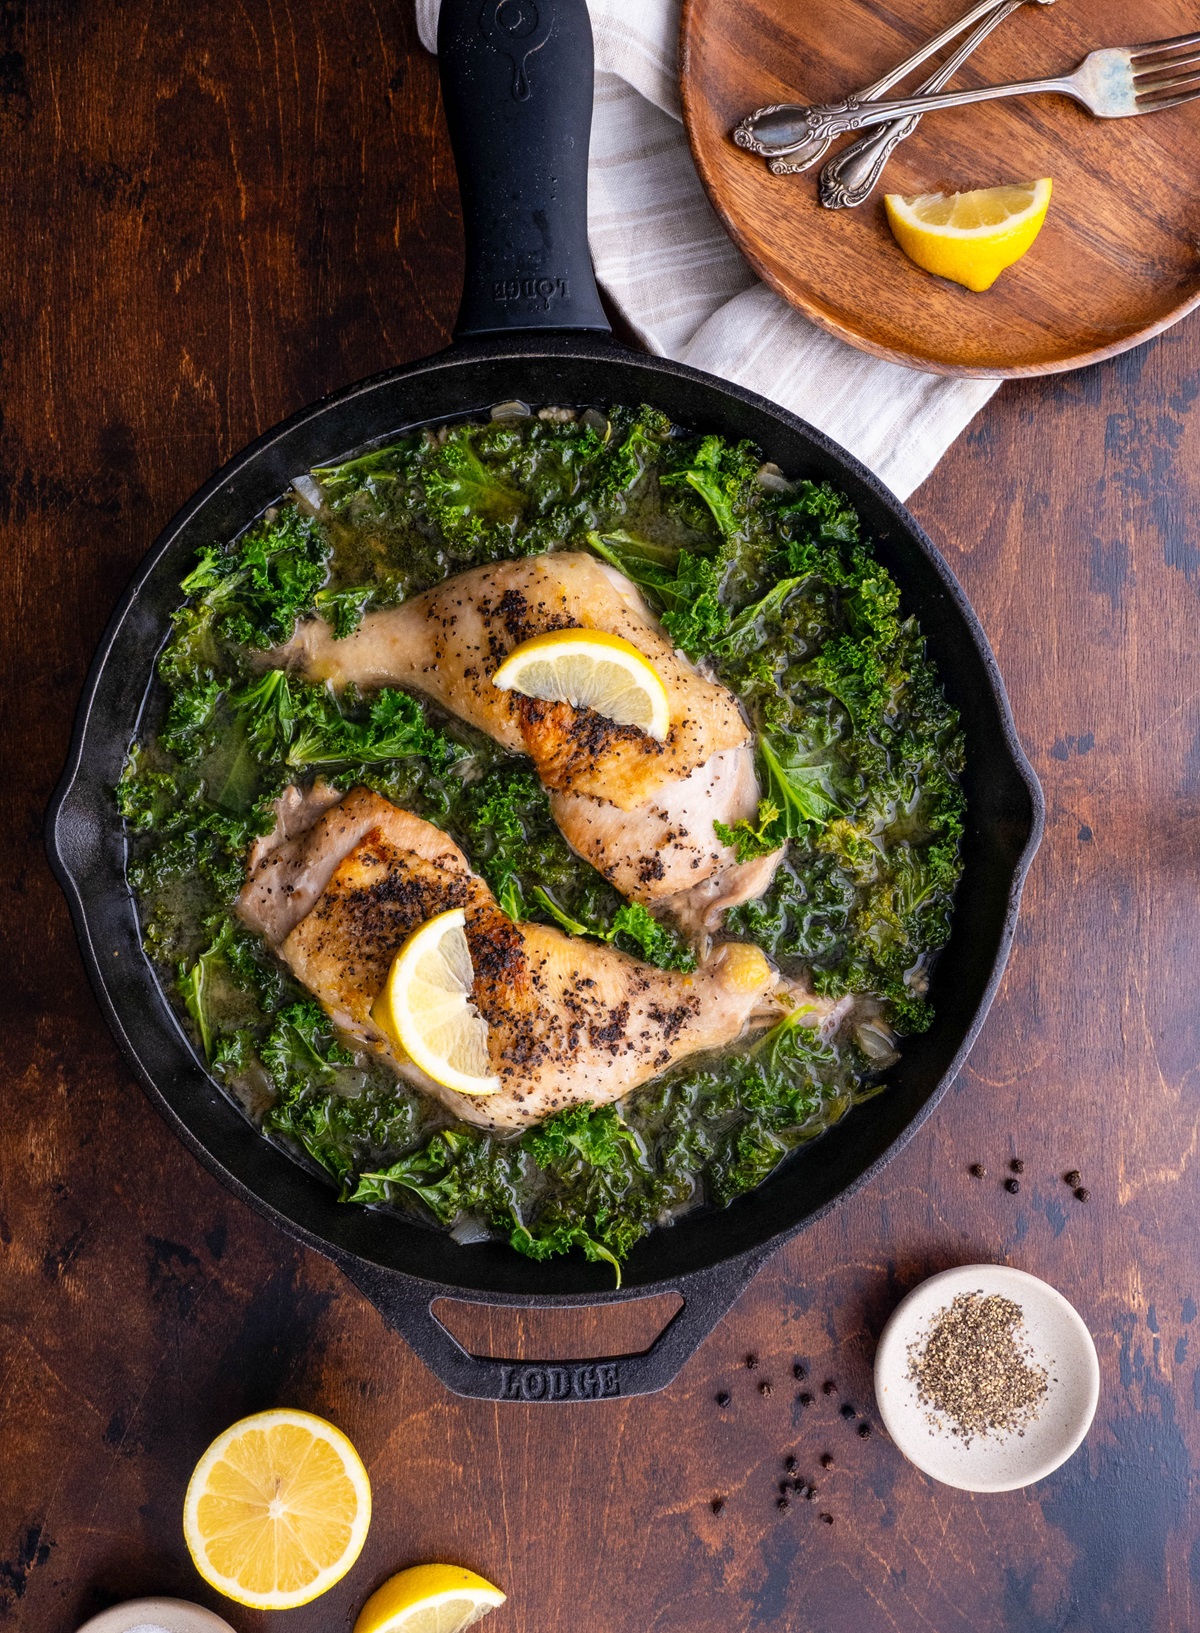 Large skillet with braised chicken and kale inside with a plate and lemons to the side, ready to serve.